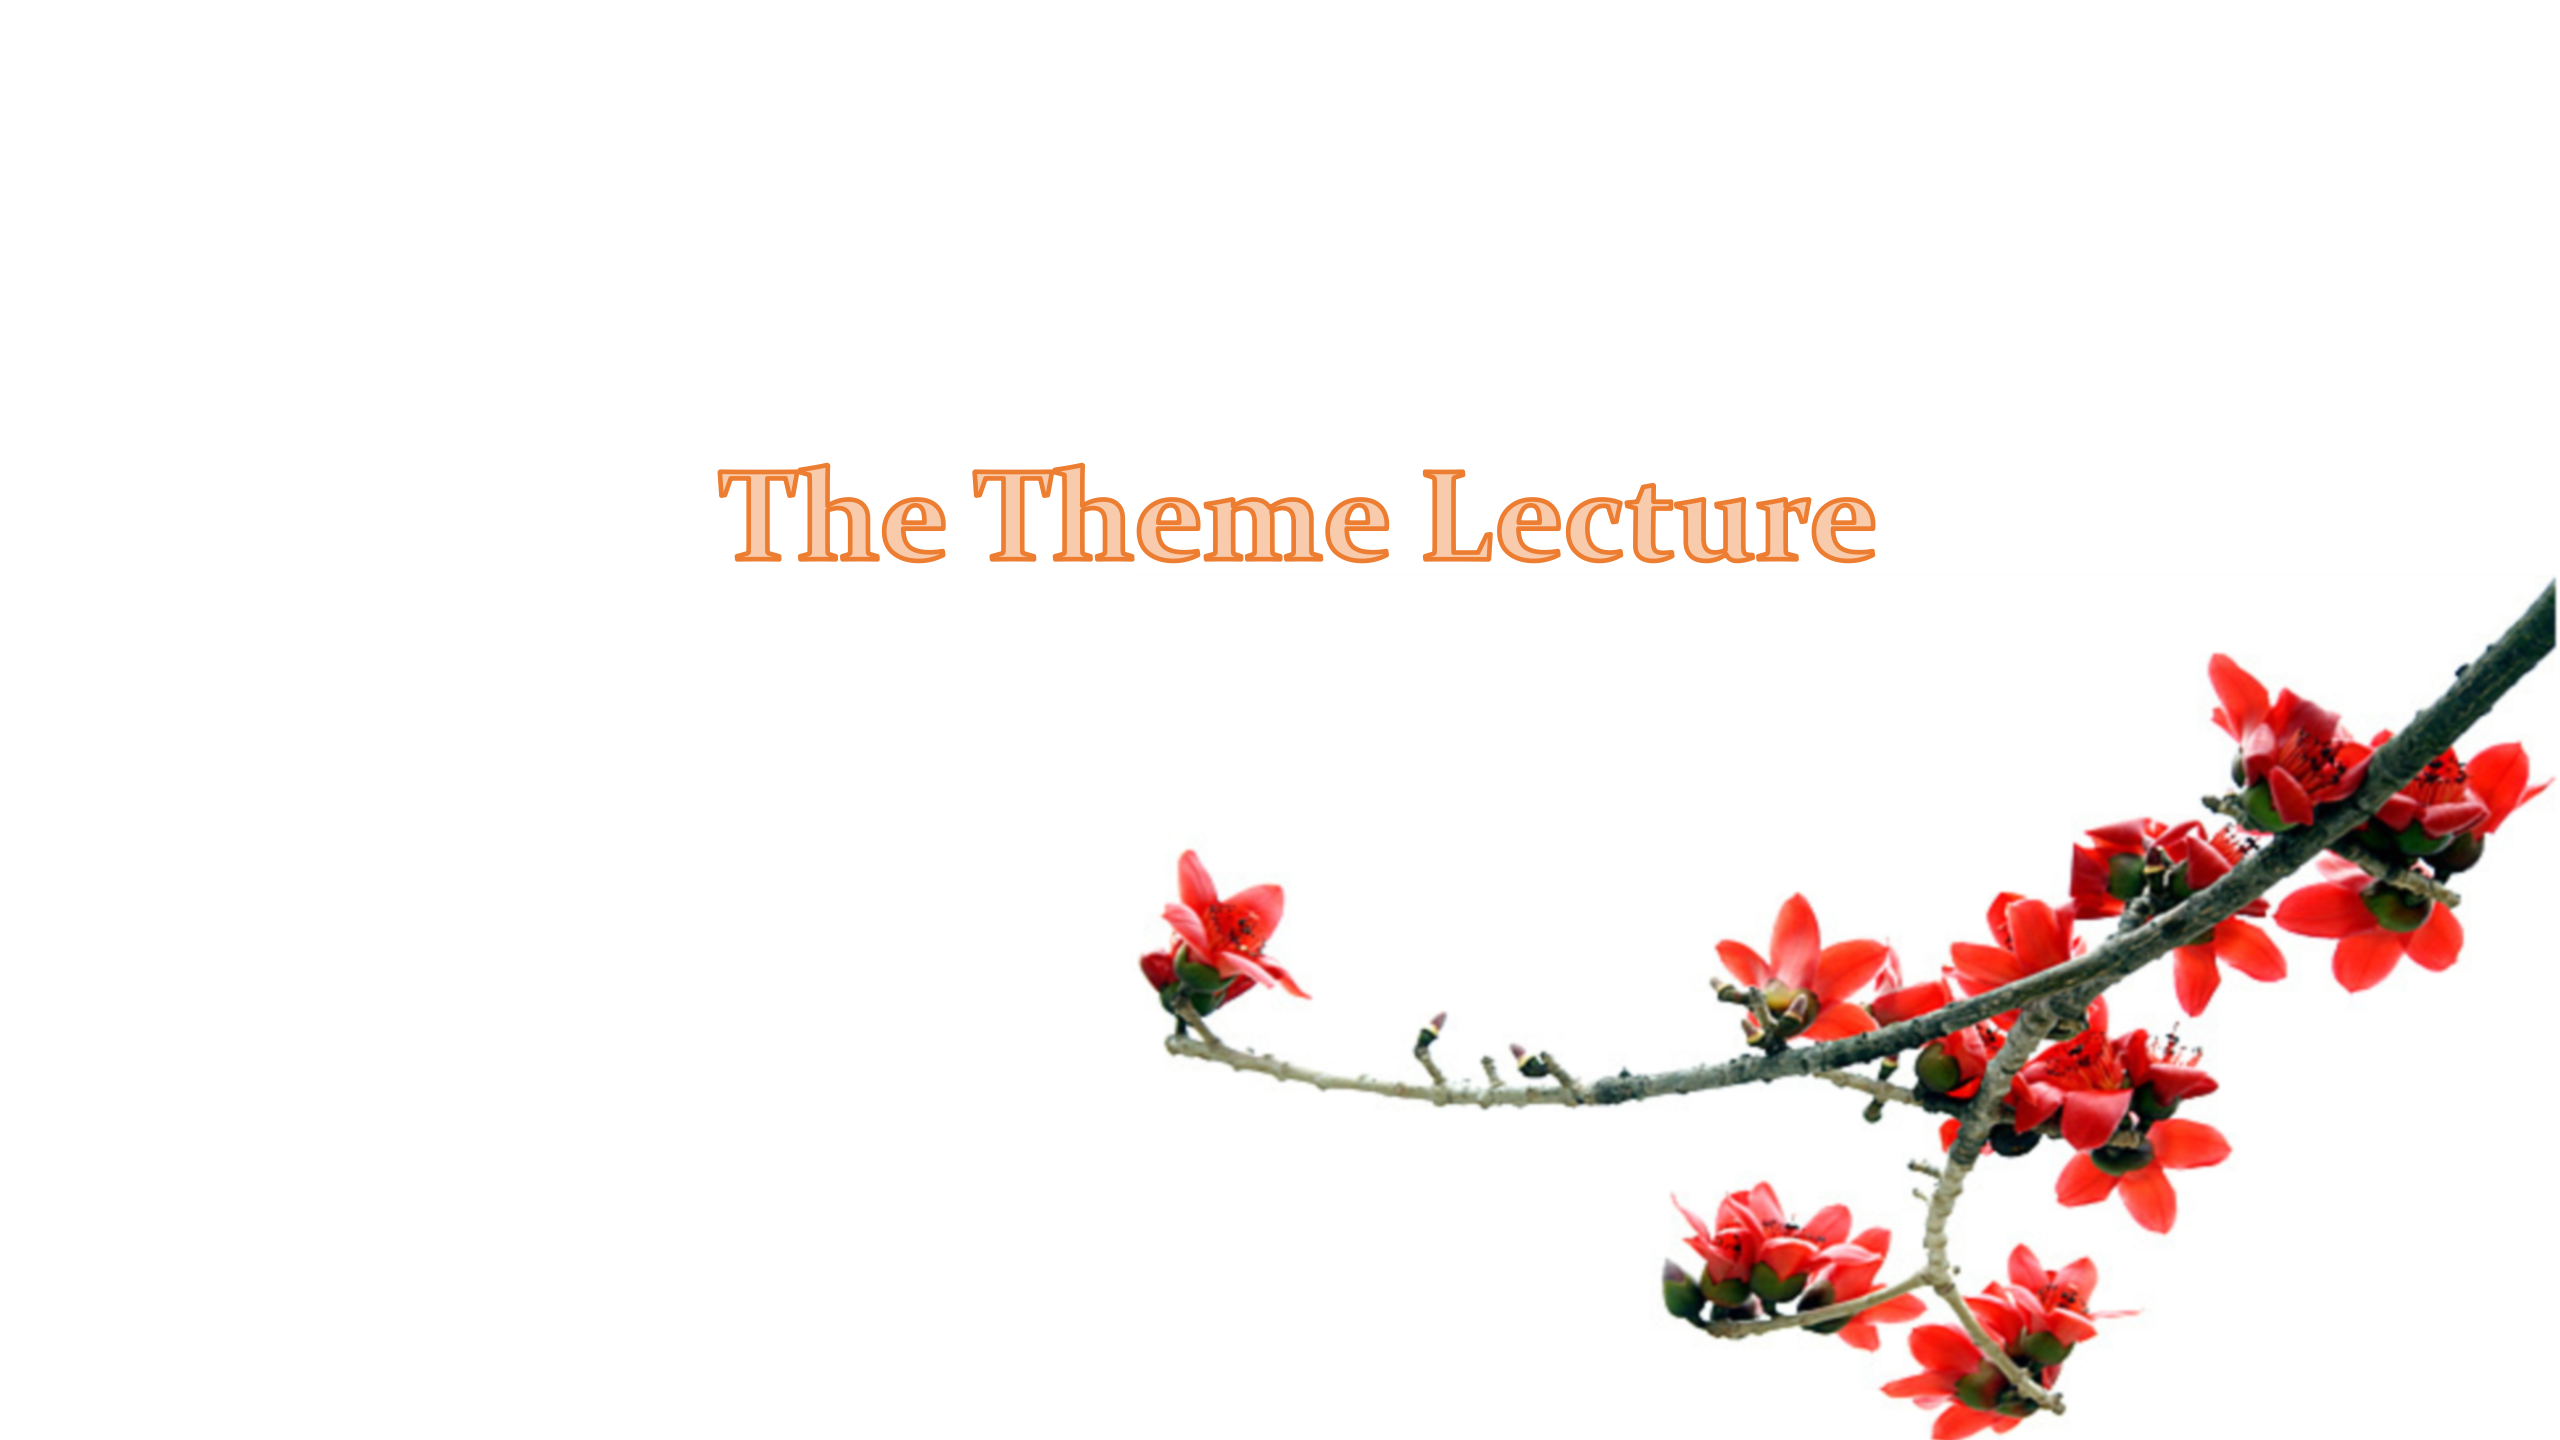 The theme lecture